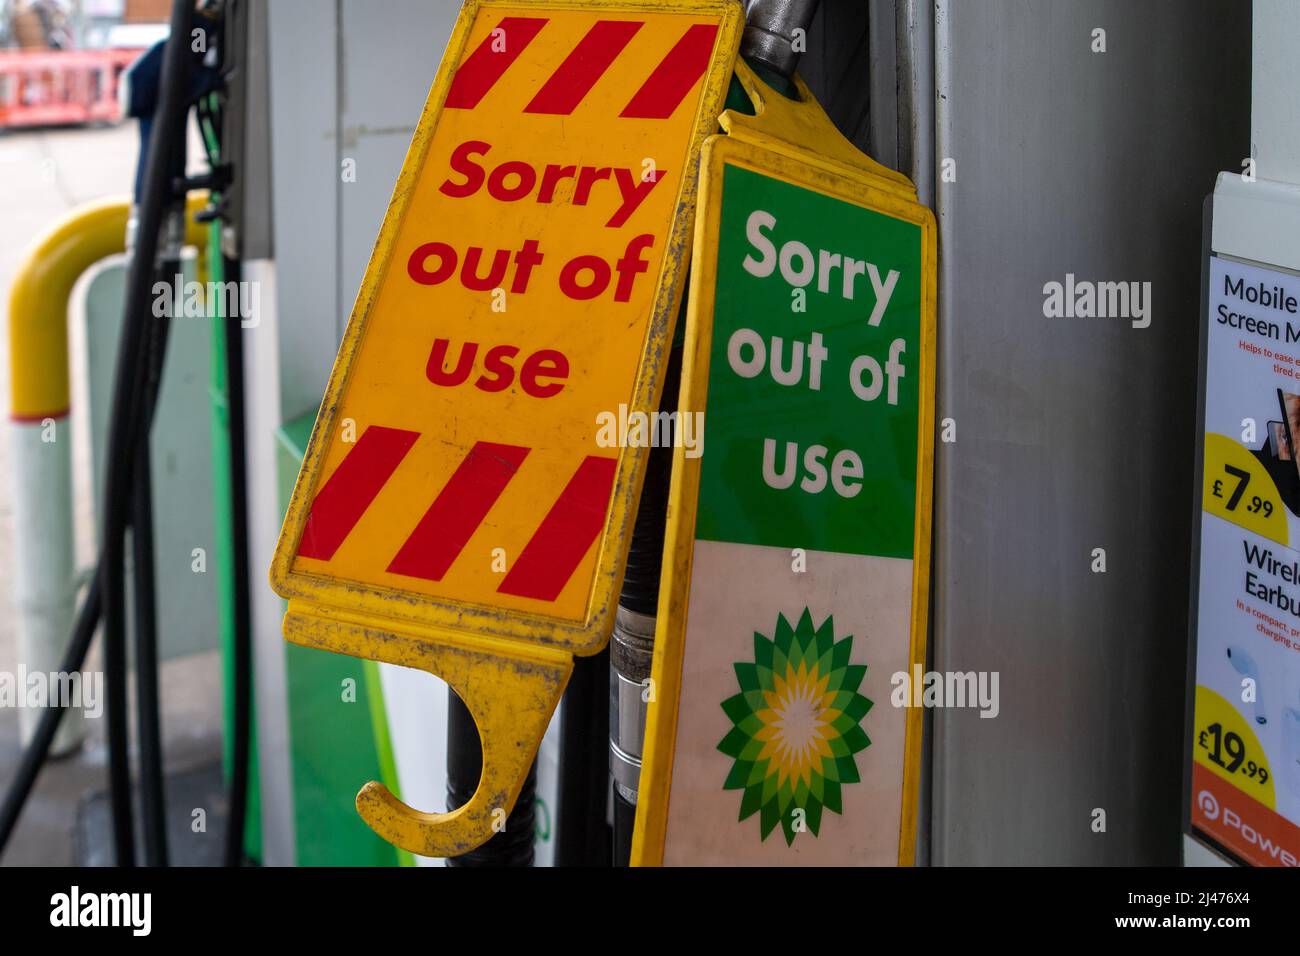 Slough, Berkshire, UK. 12th April, 2022. Some of the pumps at a BP petrol station in Slough were out of use today. Following the blockade of fuel depots by Just Stop Oil activists, many petrol stations in the South East of England have petrol shortages. Credit: Maureen McLean/Alamy Live News Stock Photo